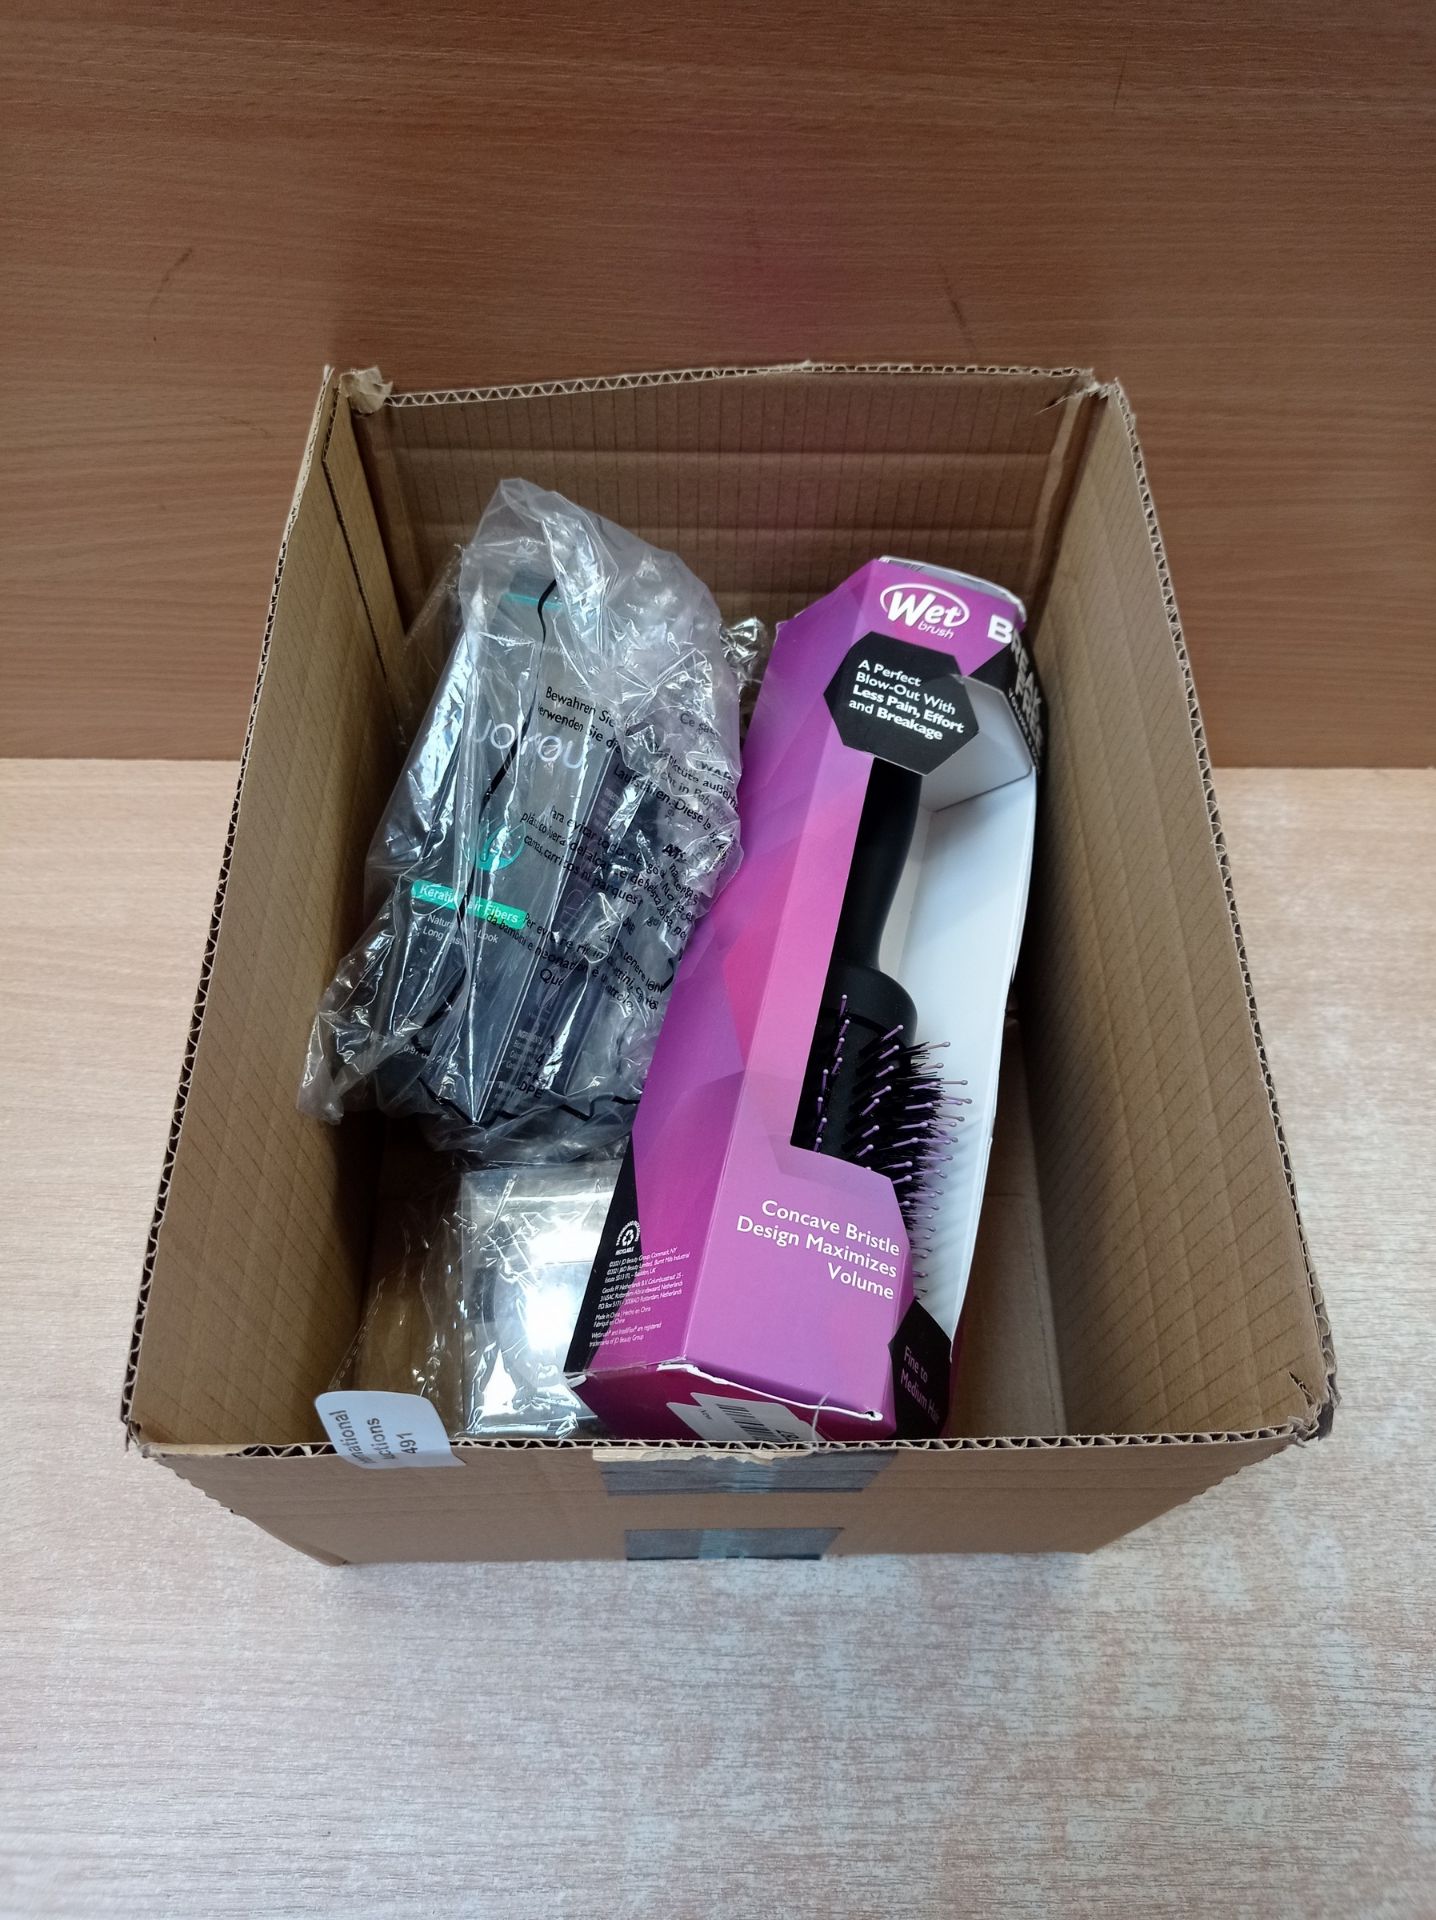 RRP £77.34 Total, Lot Consisting of 7 Items - See Description. - Image 2 of 6